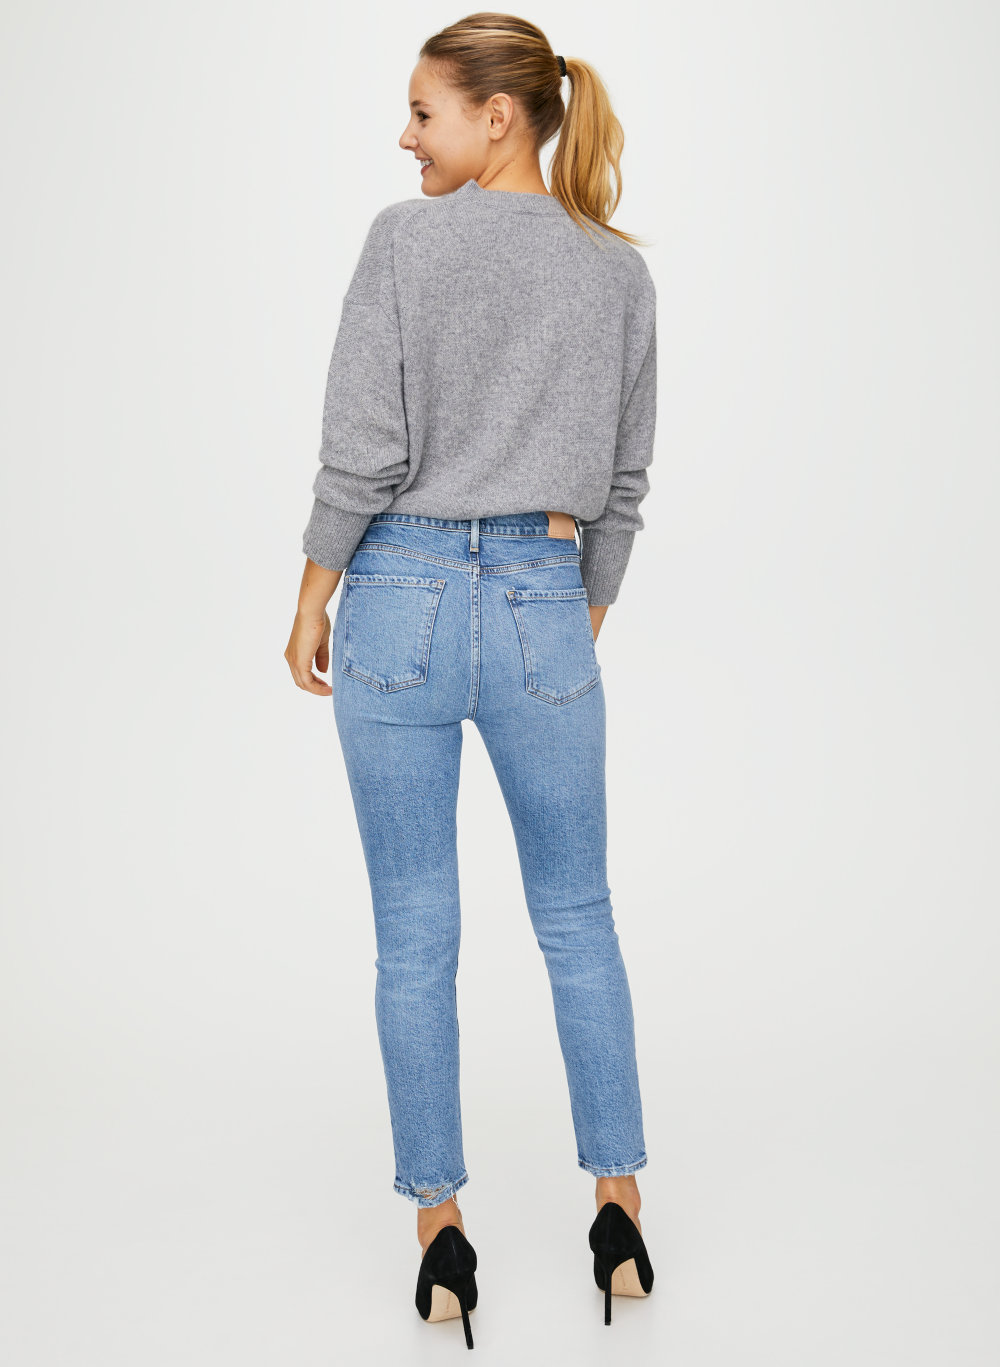 citizens of humanity olivia high rise slim ankle jeans